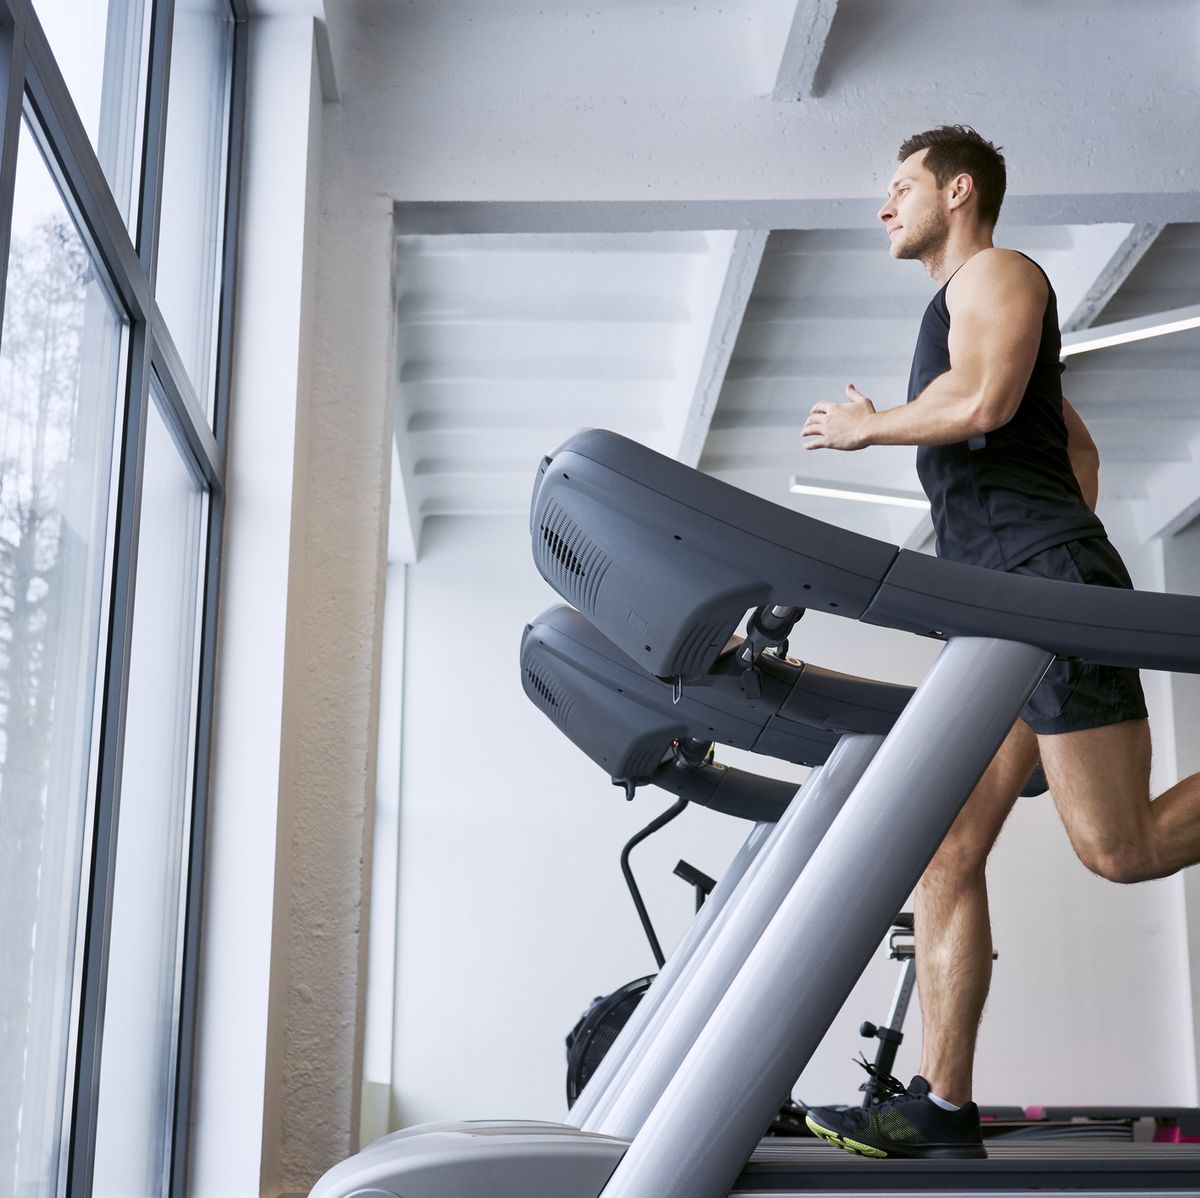 How to Pace Treadmill Runs (With a Treadmill Pace Chart)